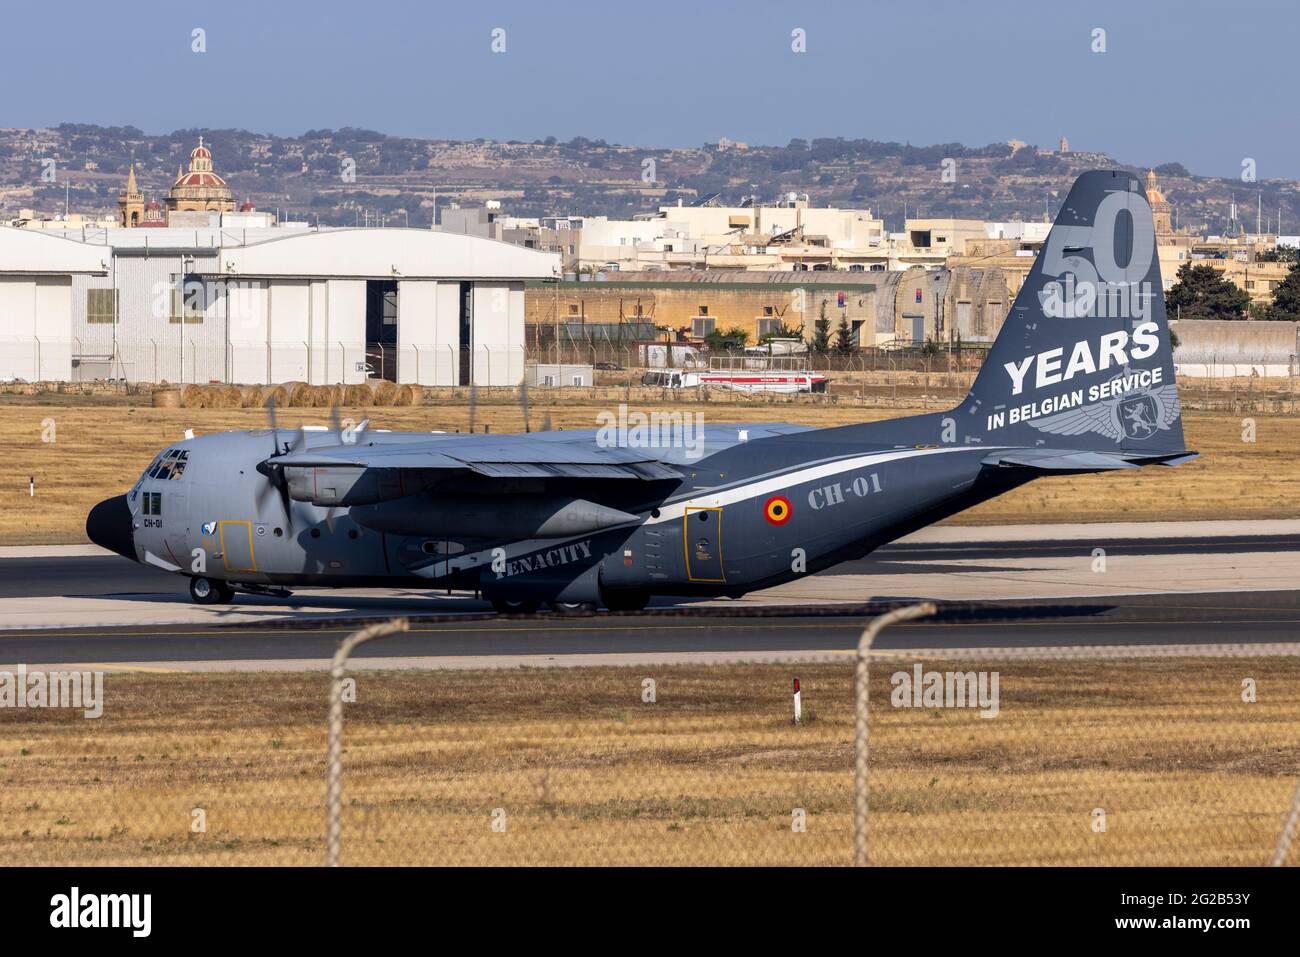 Belgian Air Force Lockheed C-130H Hercules (REG: CH-01) recently painted in special 50 years of service color scheme. Stock Photo